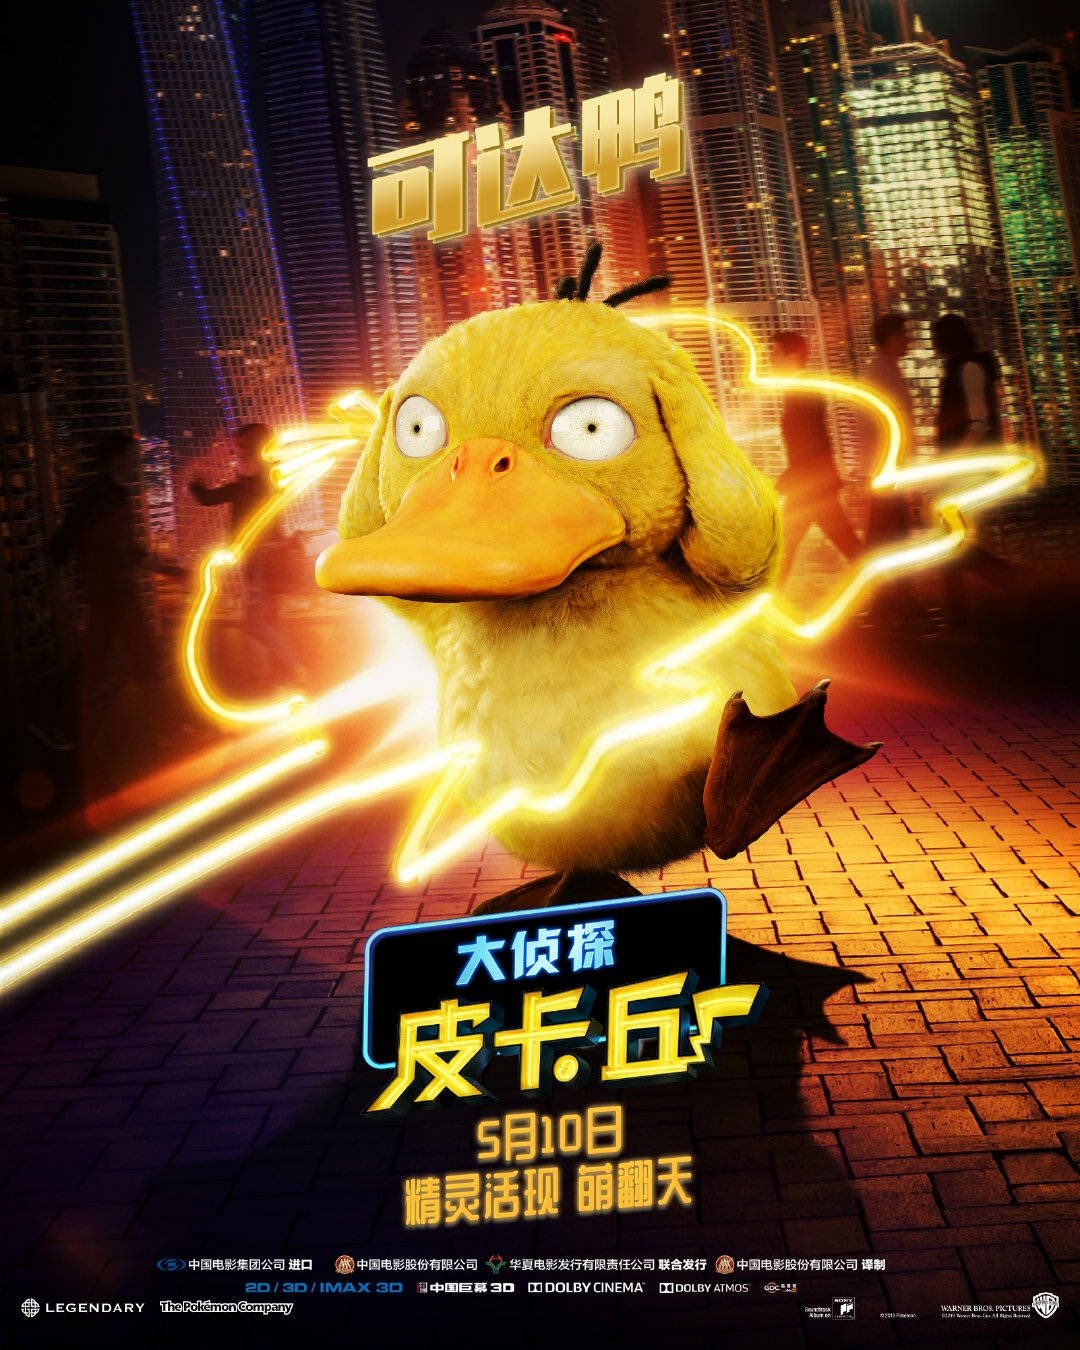 Extra Large Movie Poster Image for Pokémon Detective Pikachu (#7 of 26)